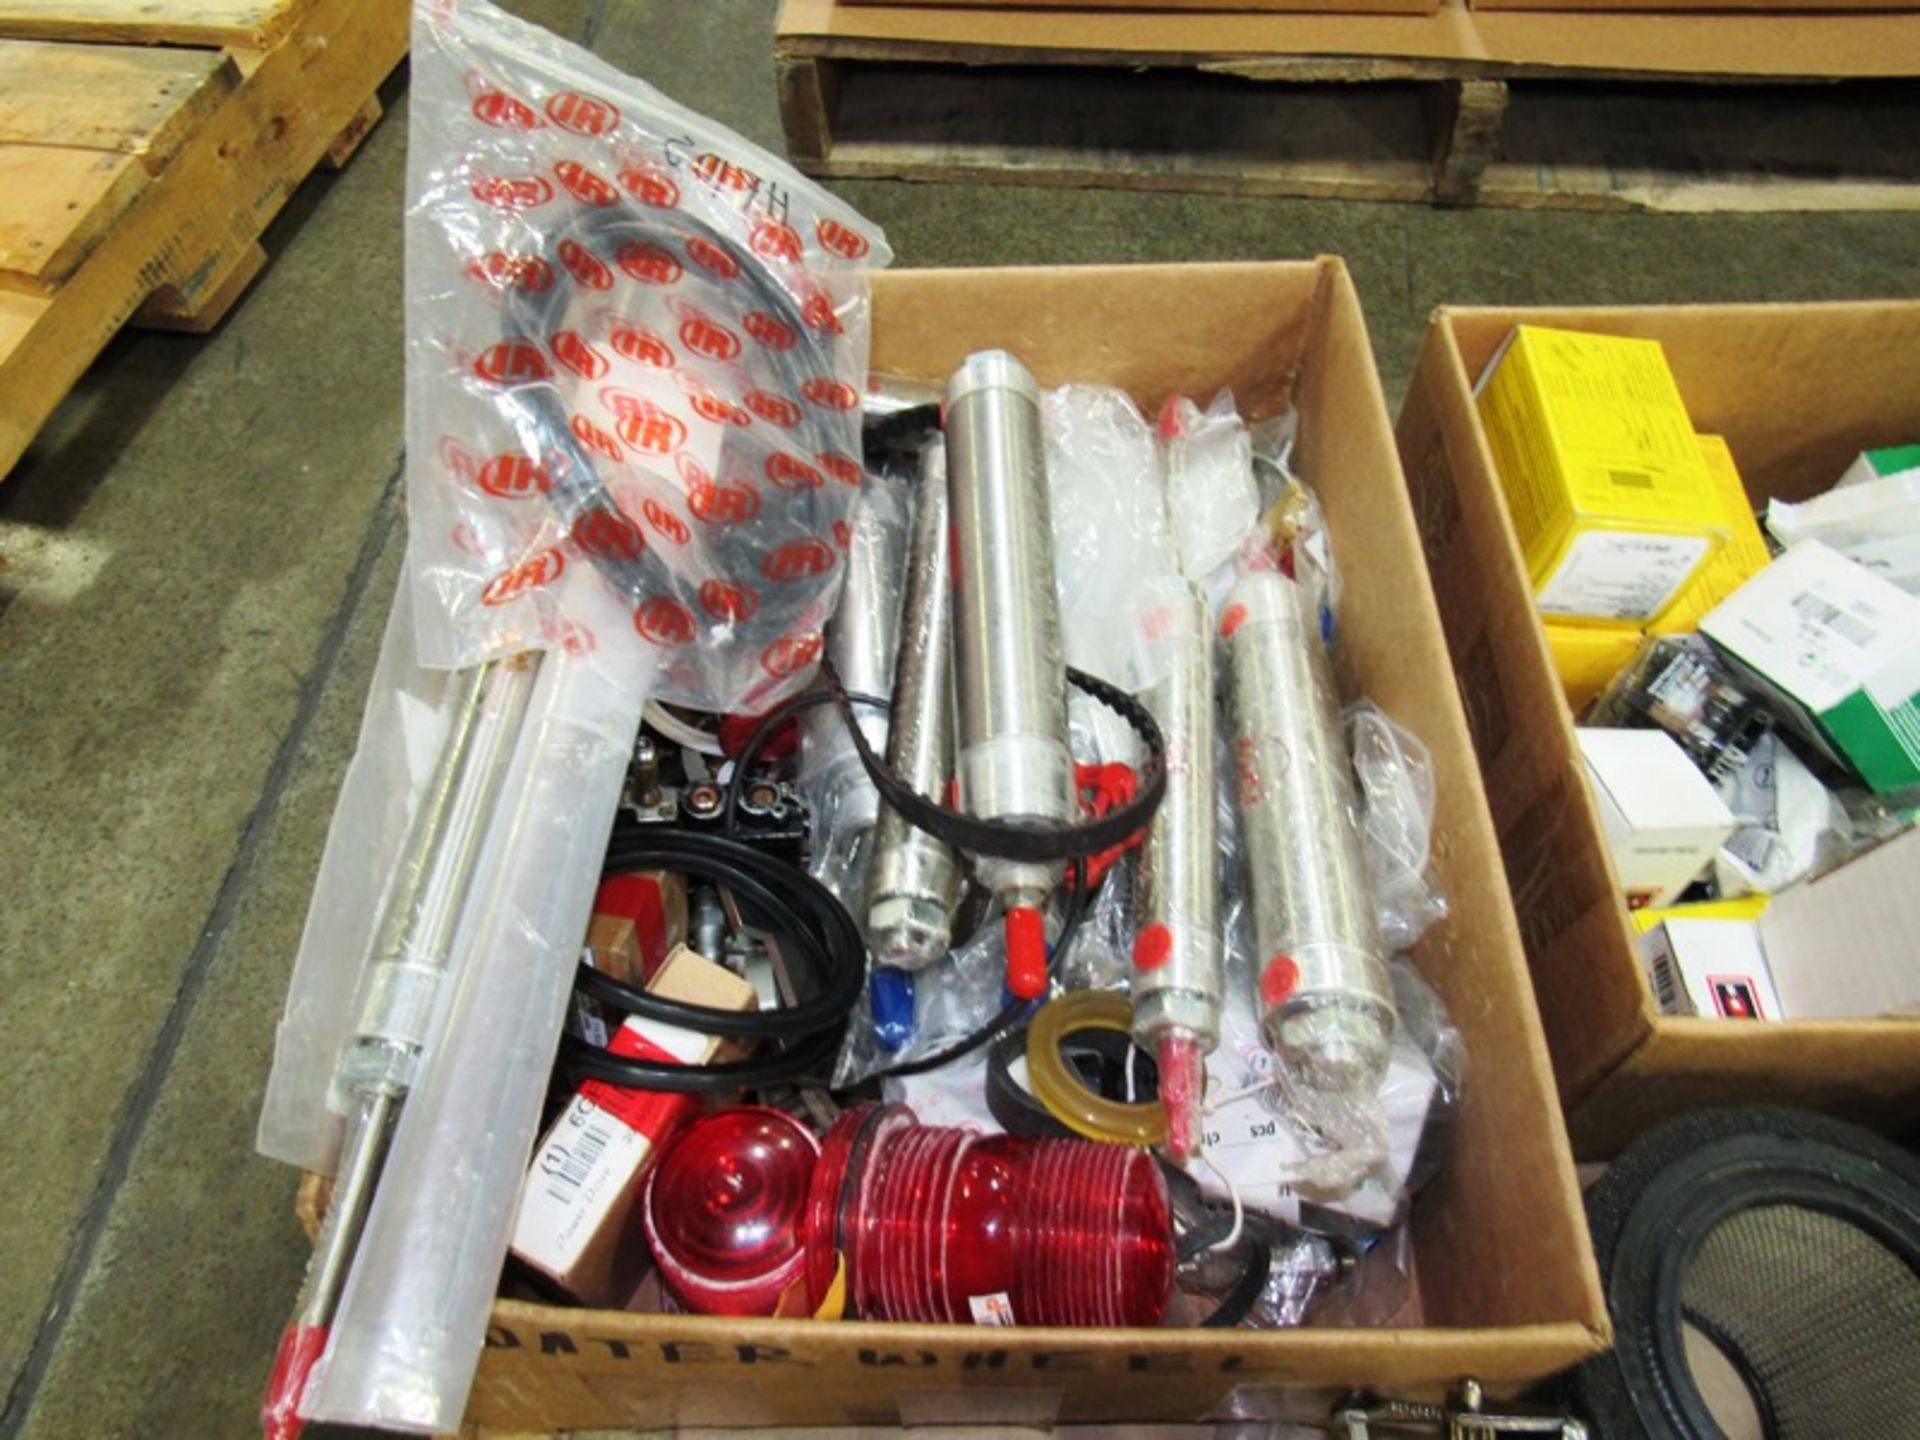 (2) Skids: Pneumatic Cylinders, Contactors, Filters, Tubing, Stack Light, Conveyor Pieces, Wire, - Image 3 of 5